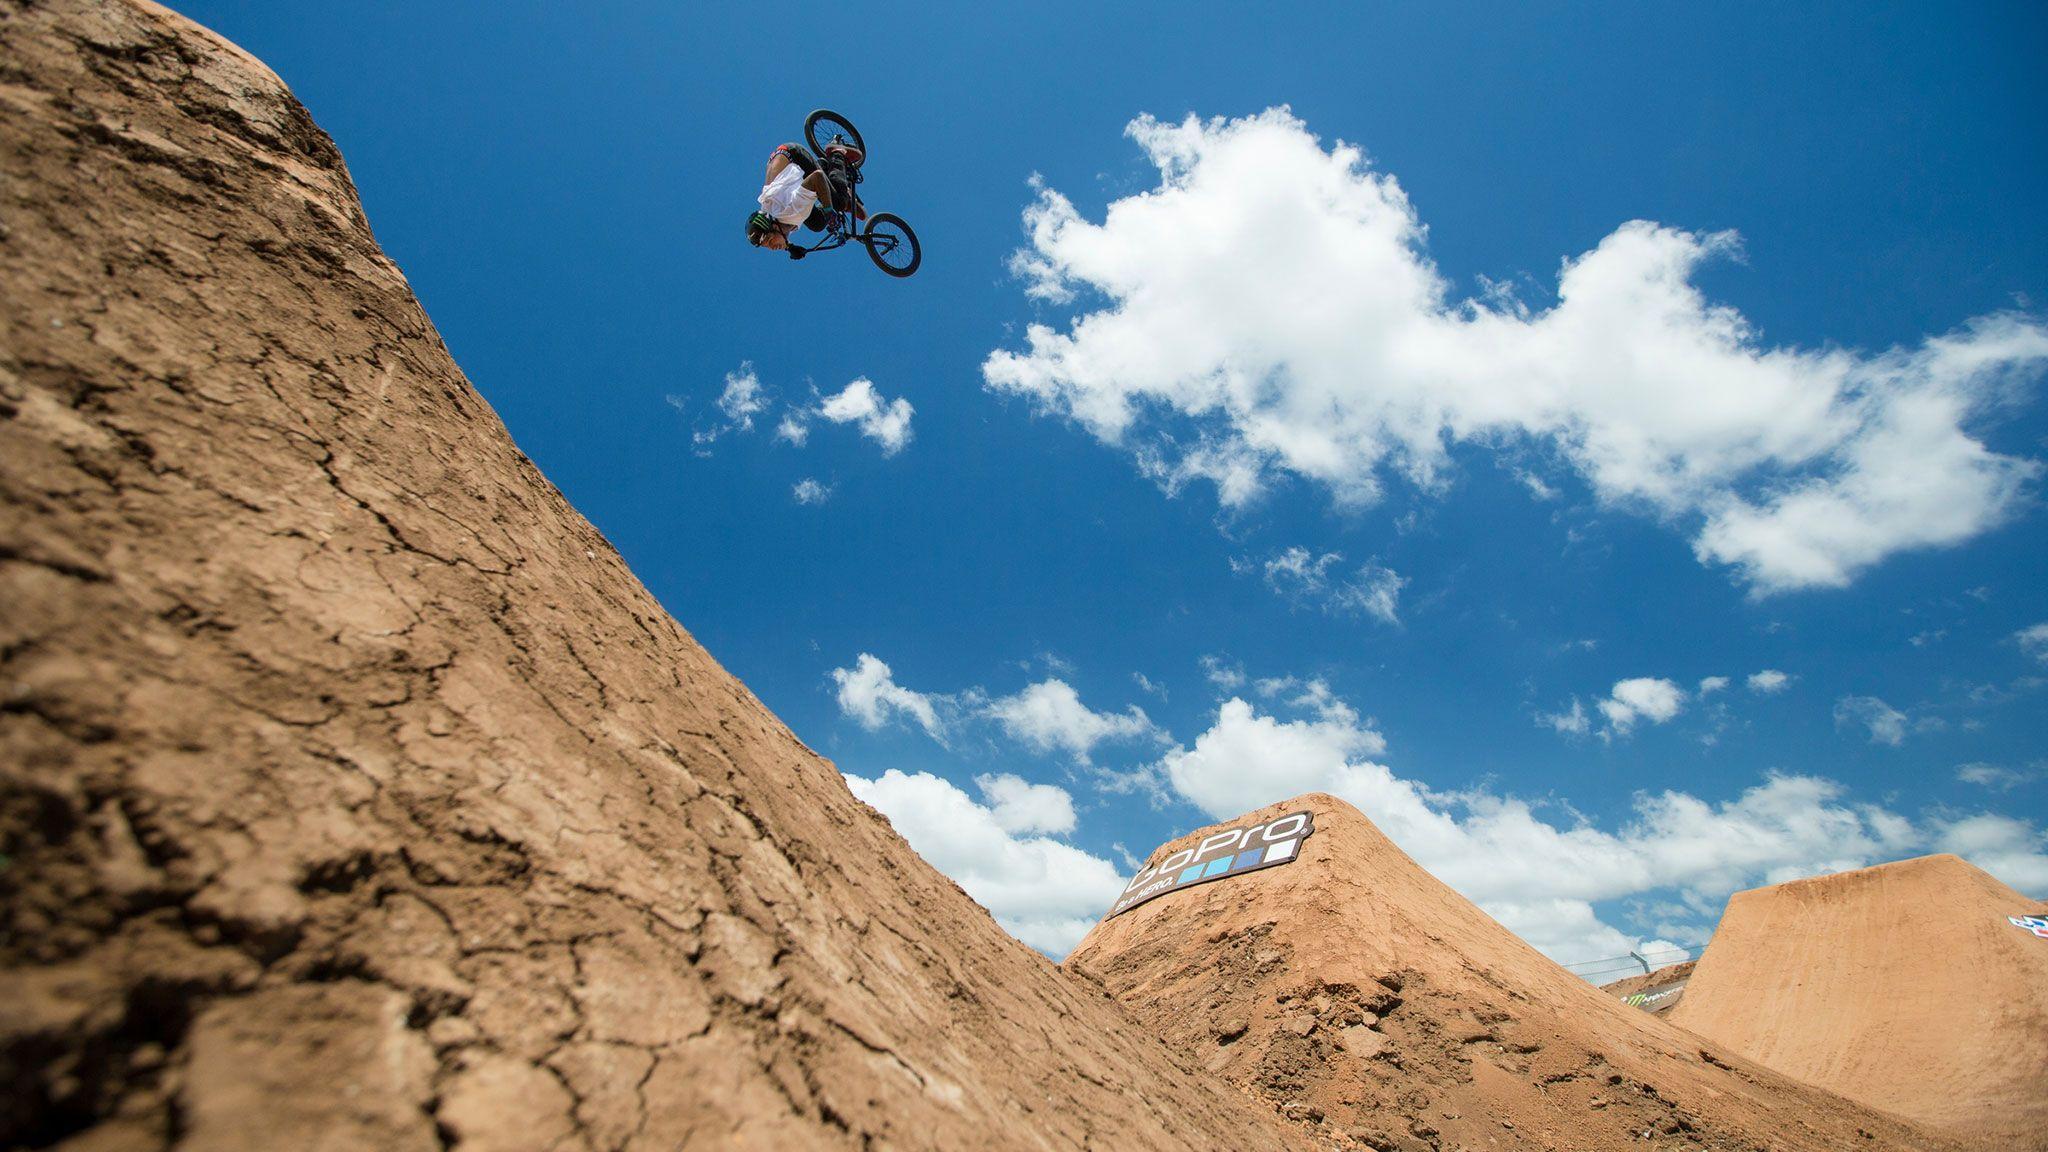 X Games Austin preview Dirt, Baldock goes for three